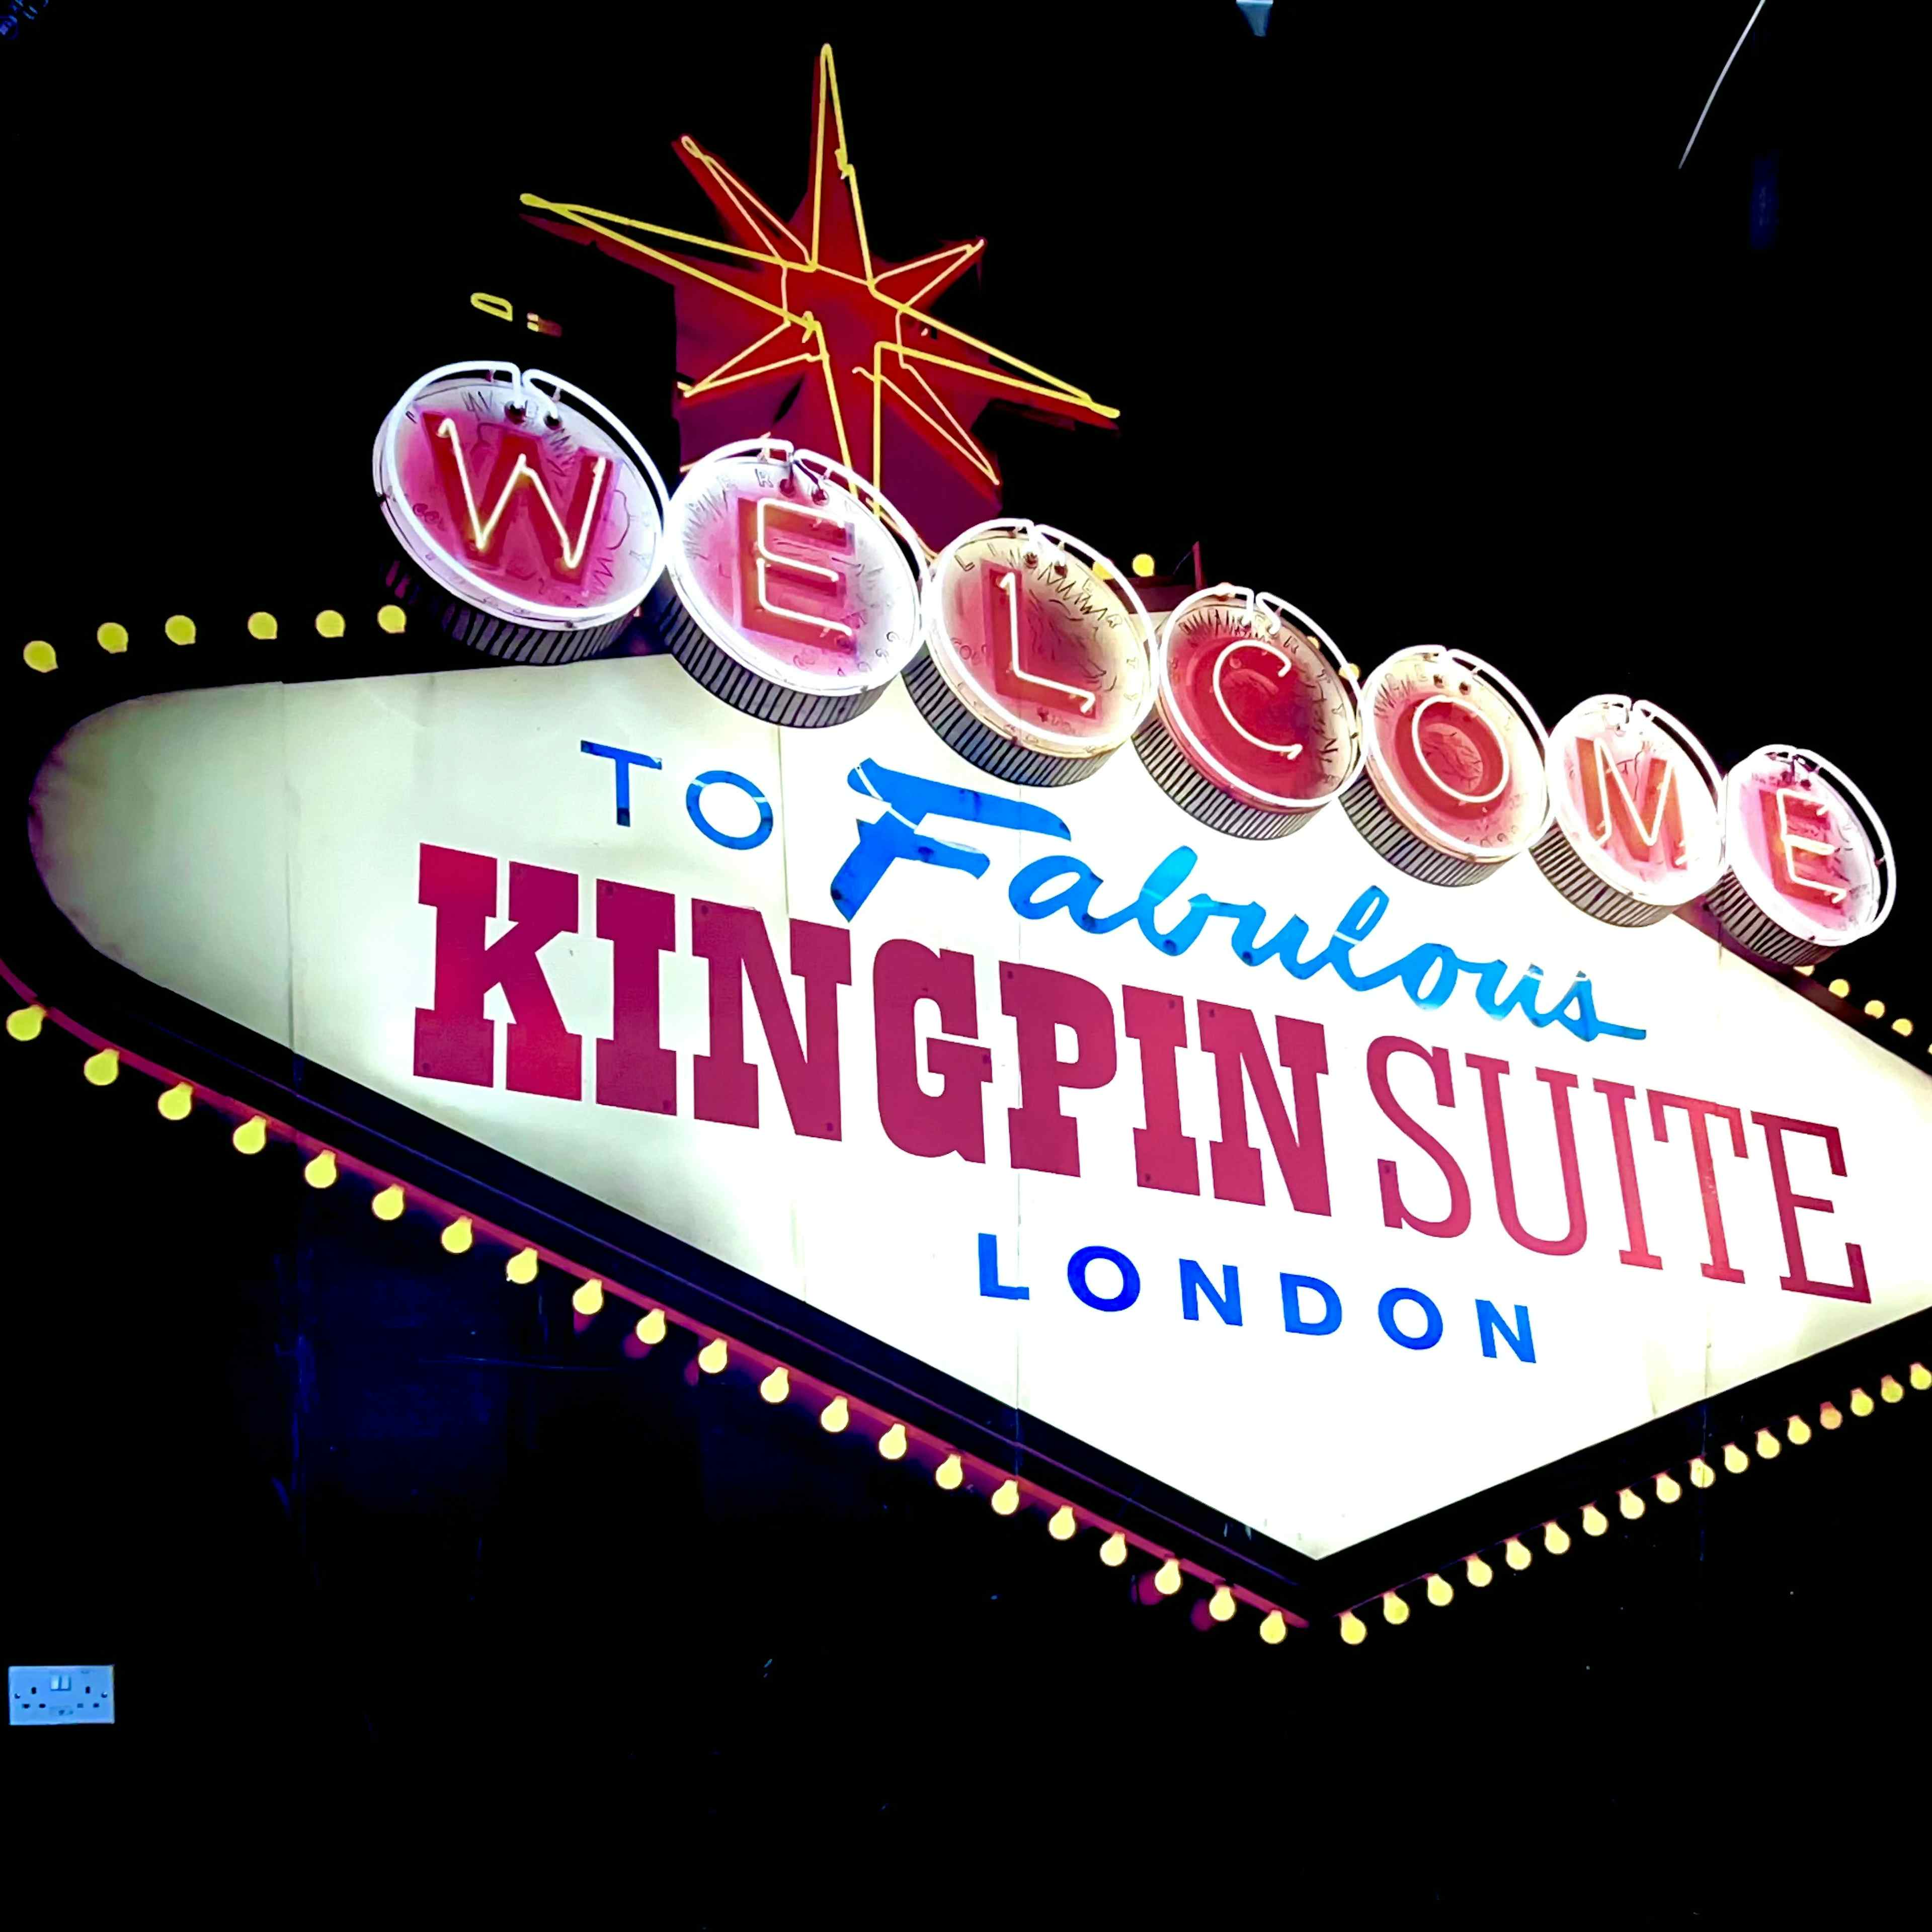 Bloomsbury Bowling Lanes & The Kingpin Suite - The KingPin Suite image 2